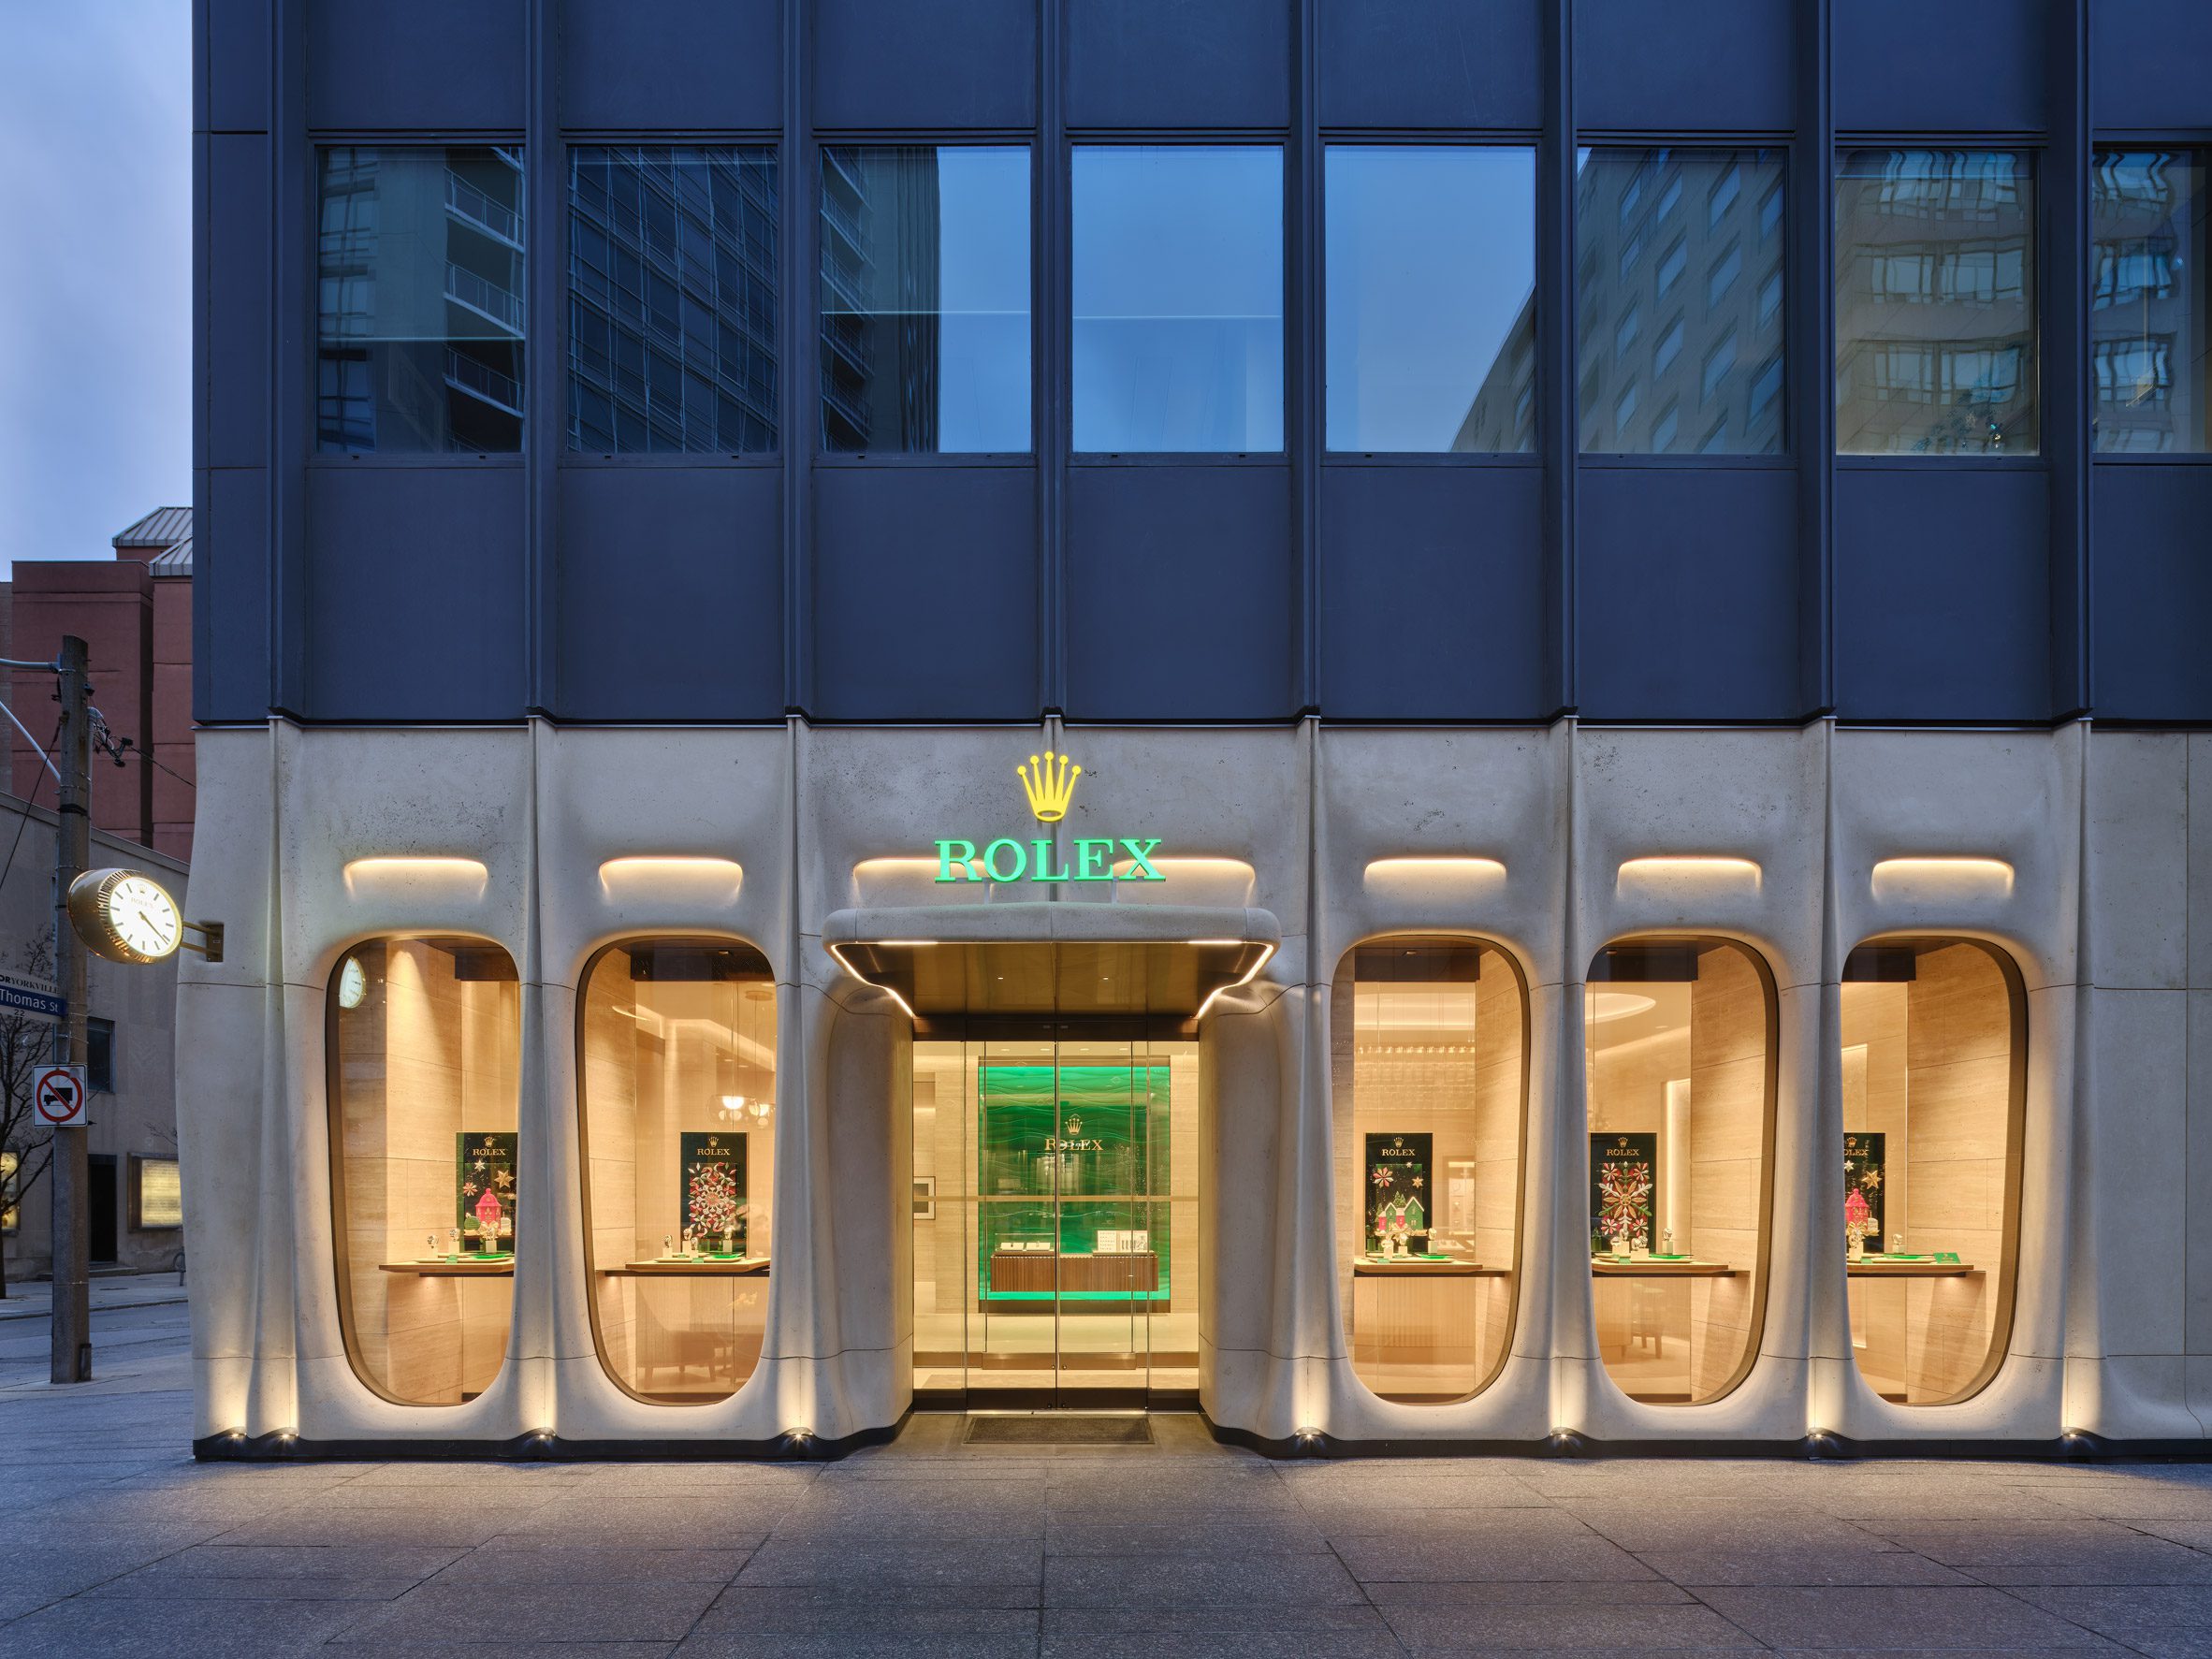 Front facade of the Rolex Toronto store at night